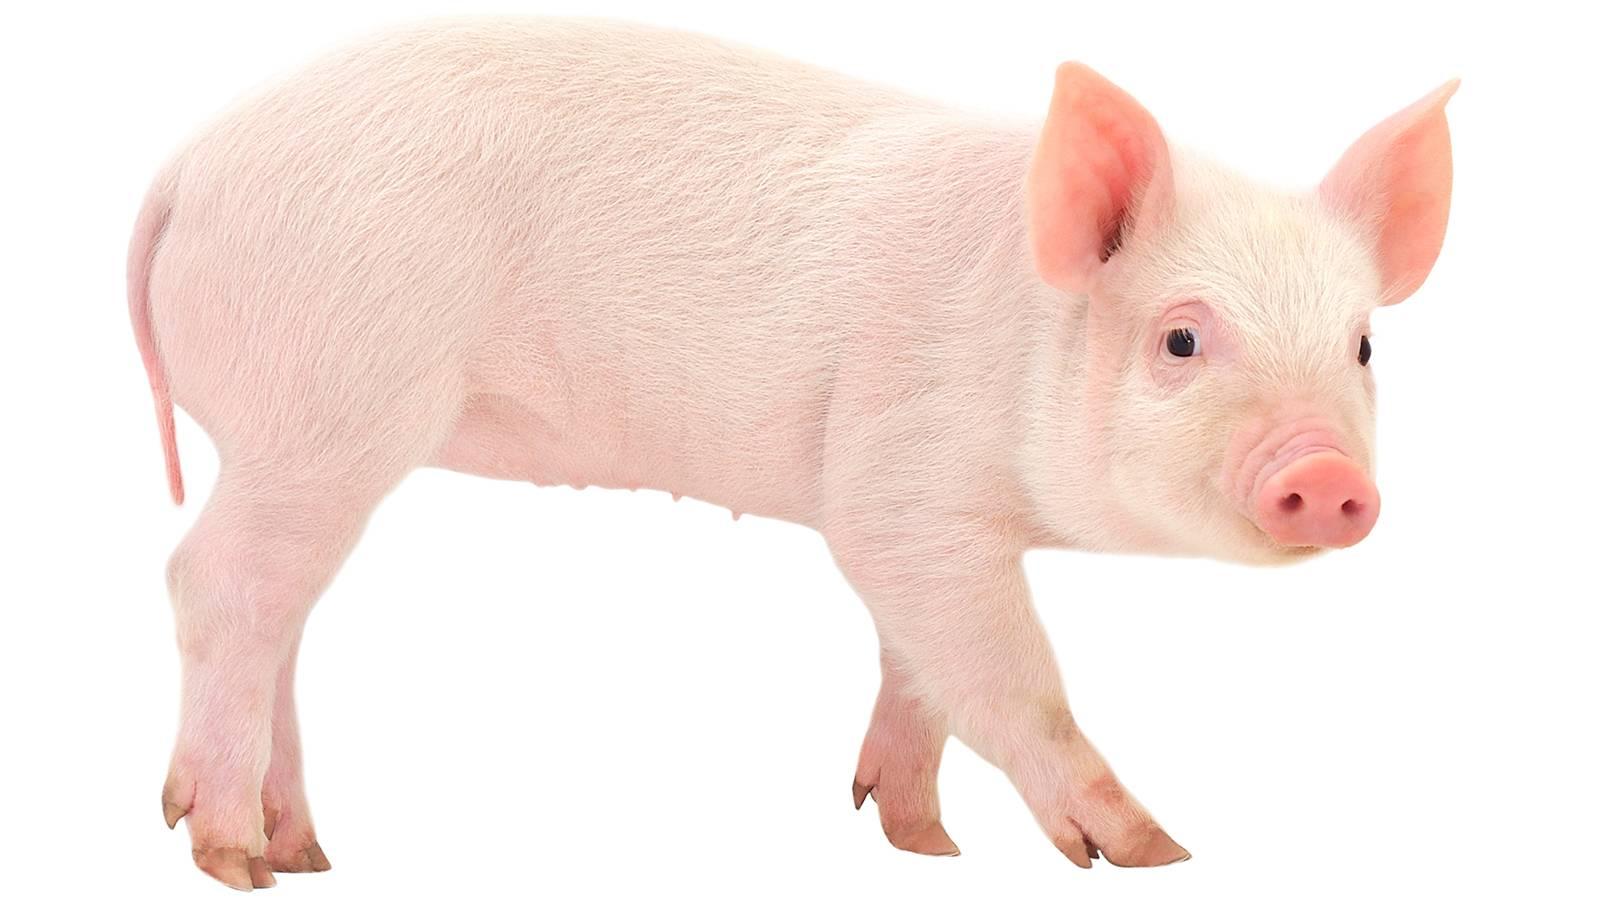 PC 1600x900 Pig Wallpaper, Wallpaper and Picture Gallery download